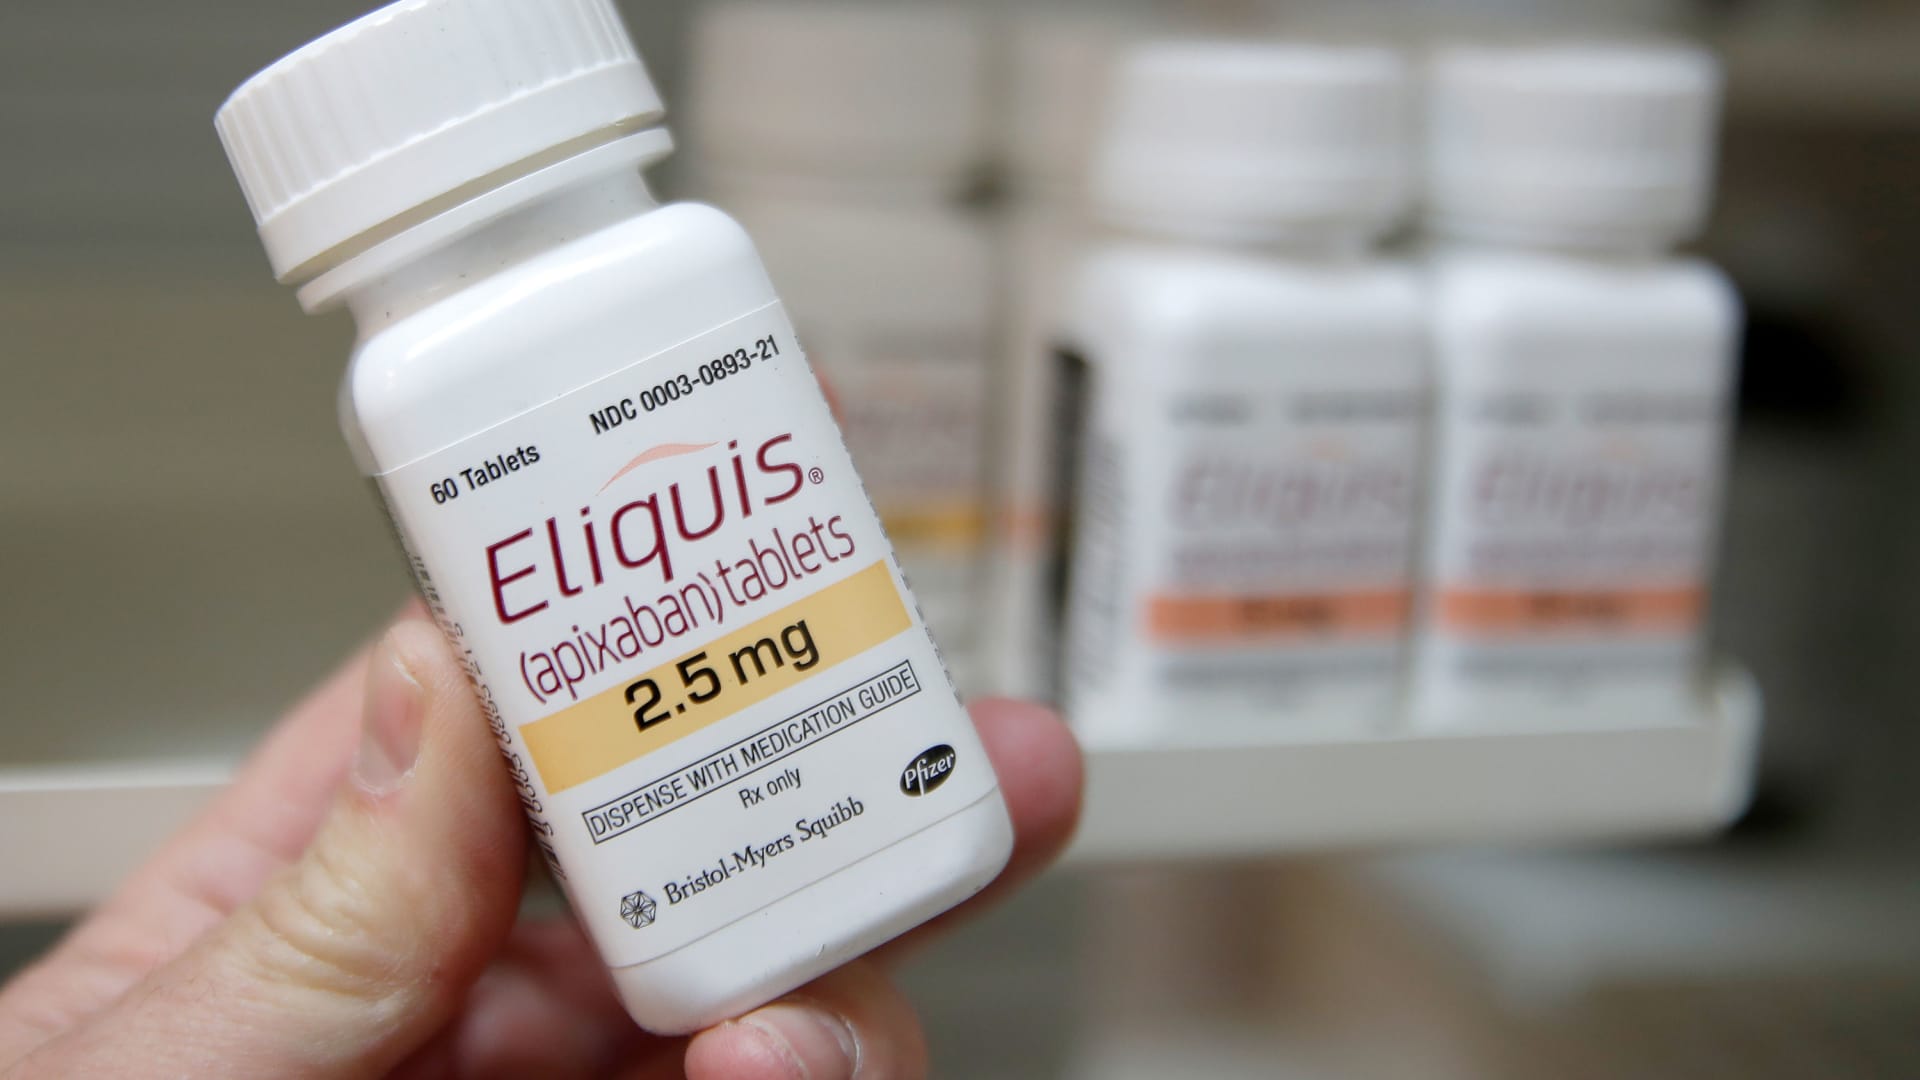 Biden administration unveils first 10 drugs subject to Medicare price negotiations